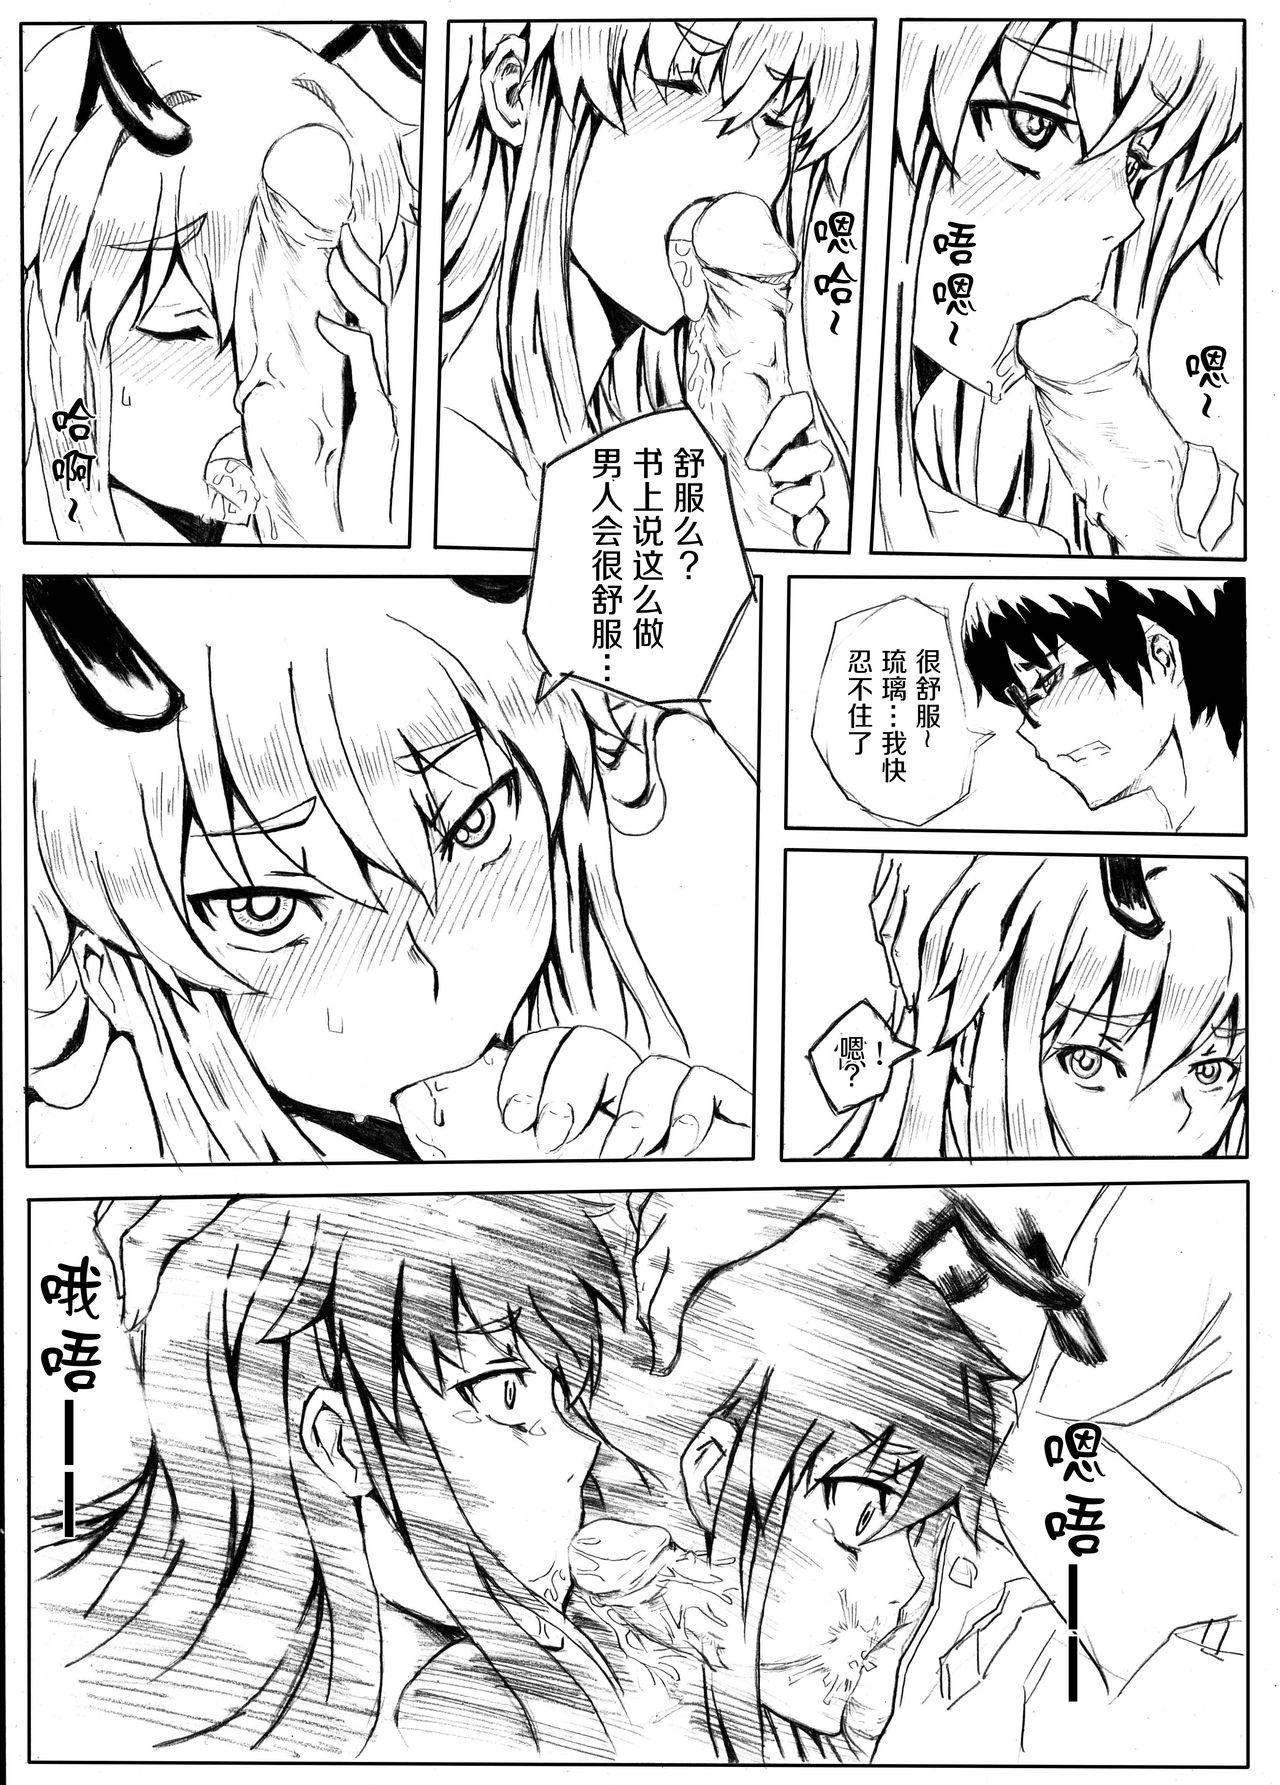 Balls [Shuseikan(Chinese Animation-School Shock)] Don`t Leave Me Alone 201108 [Chinese]（不想记名汉化） - School shock Highheels - Page 10